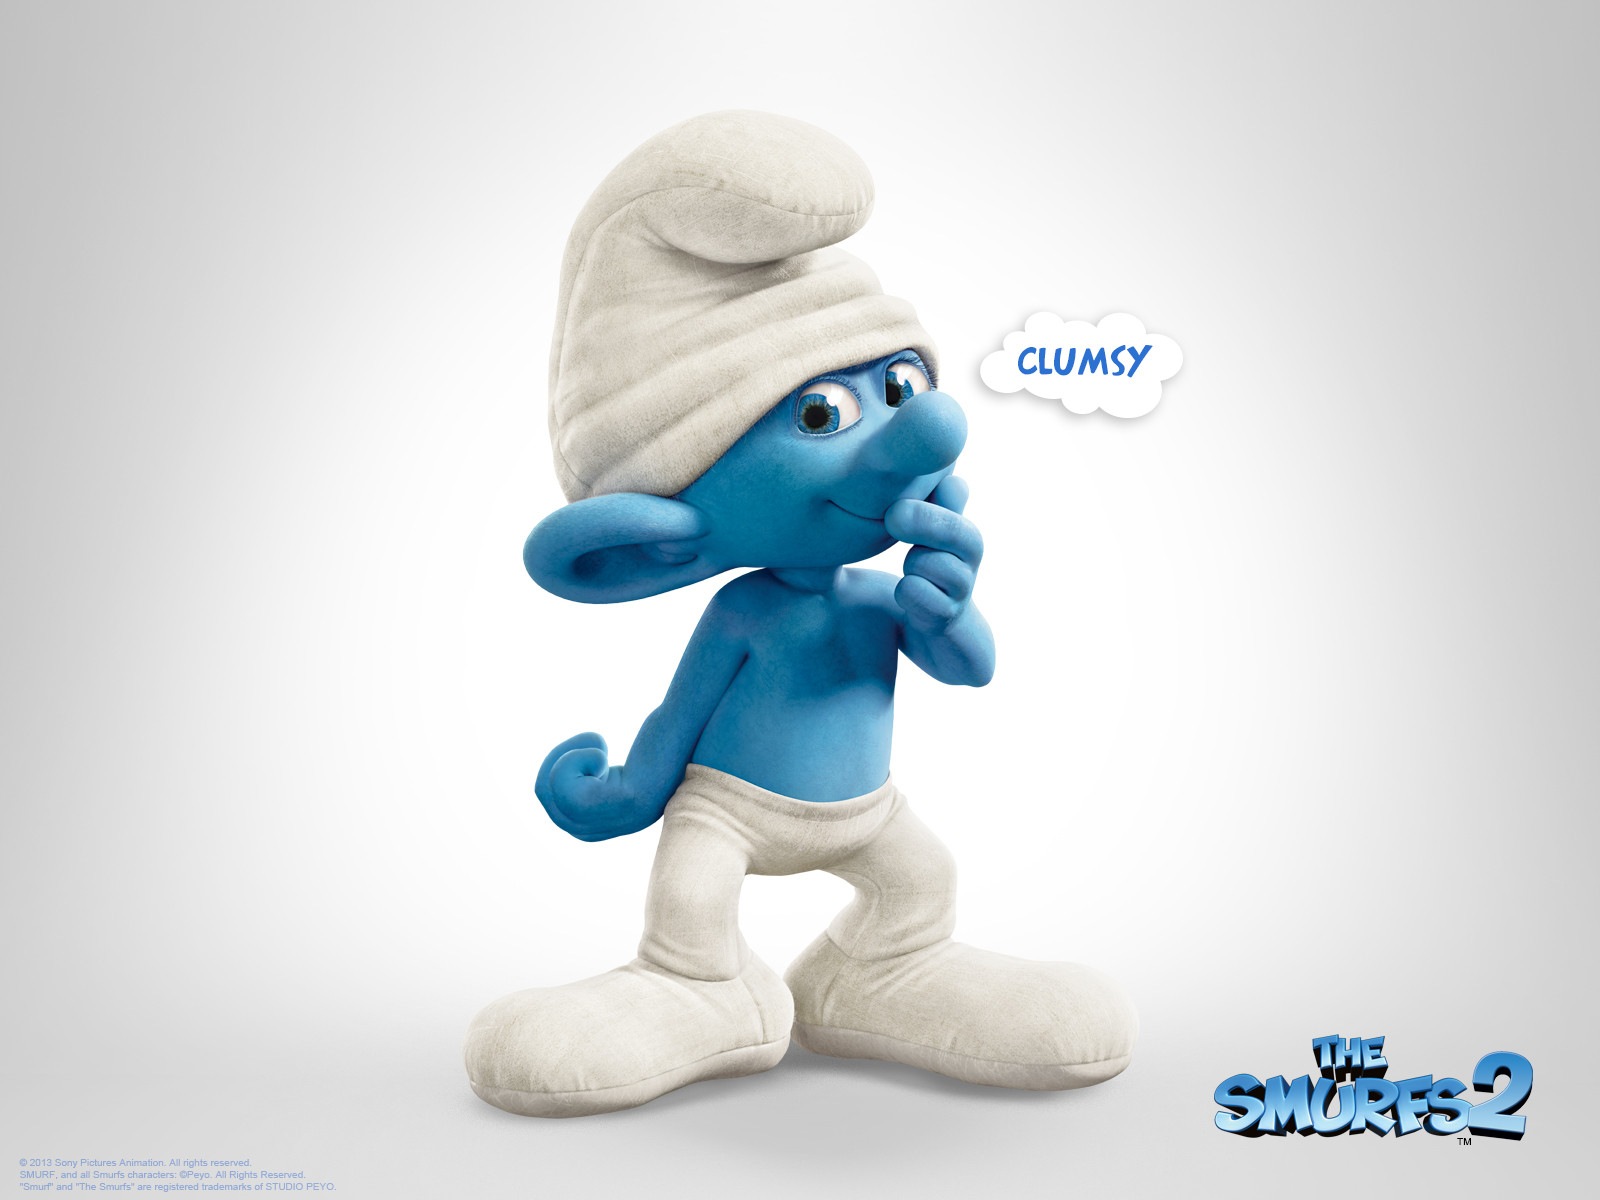 The Smurfs 2 HD movie wallpapers #8 - 1600x1200